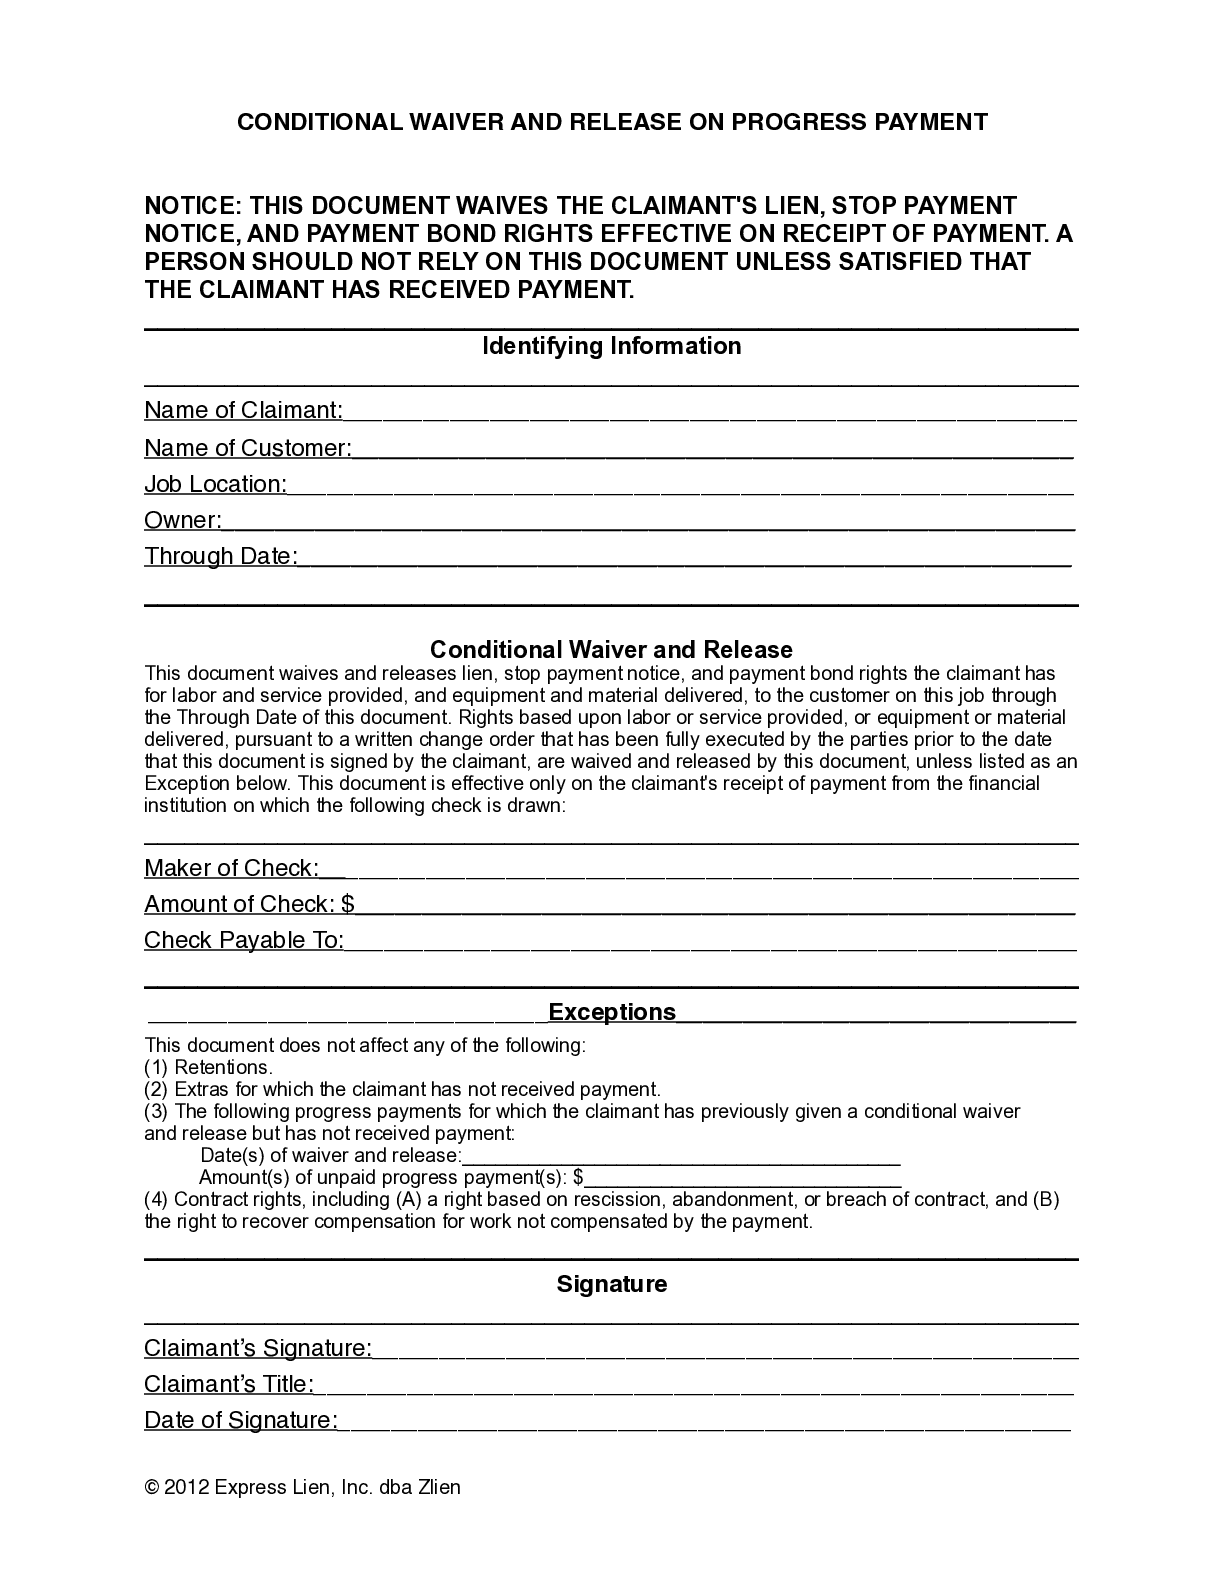 North Carolina Partial Conditional Lien Waiver Form - free from